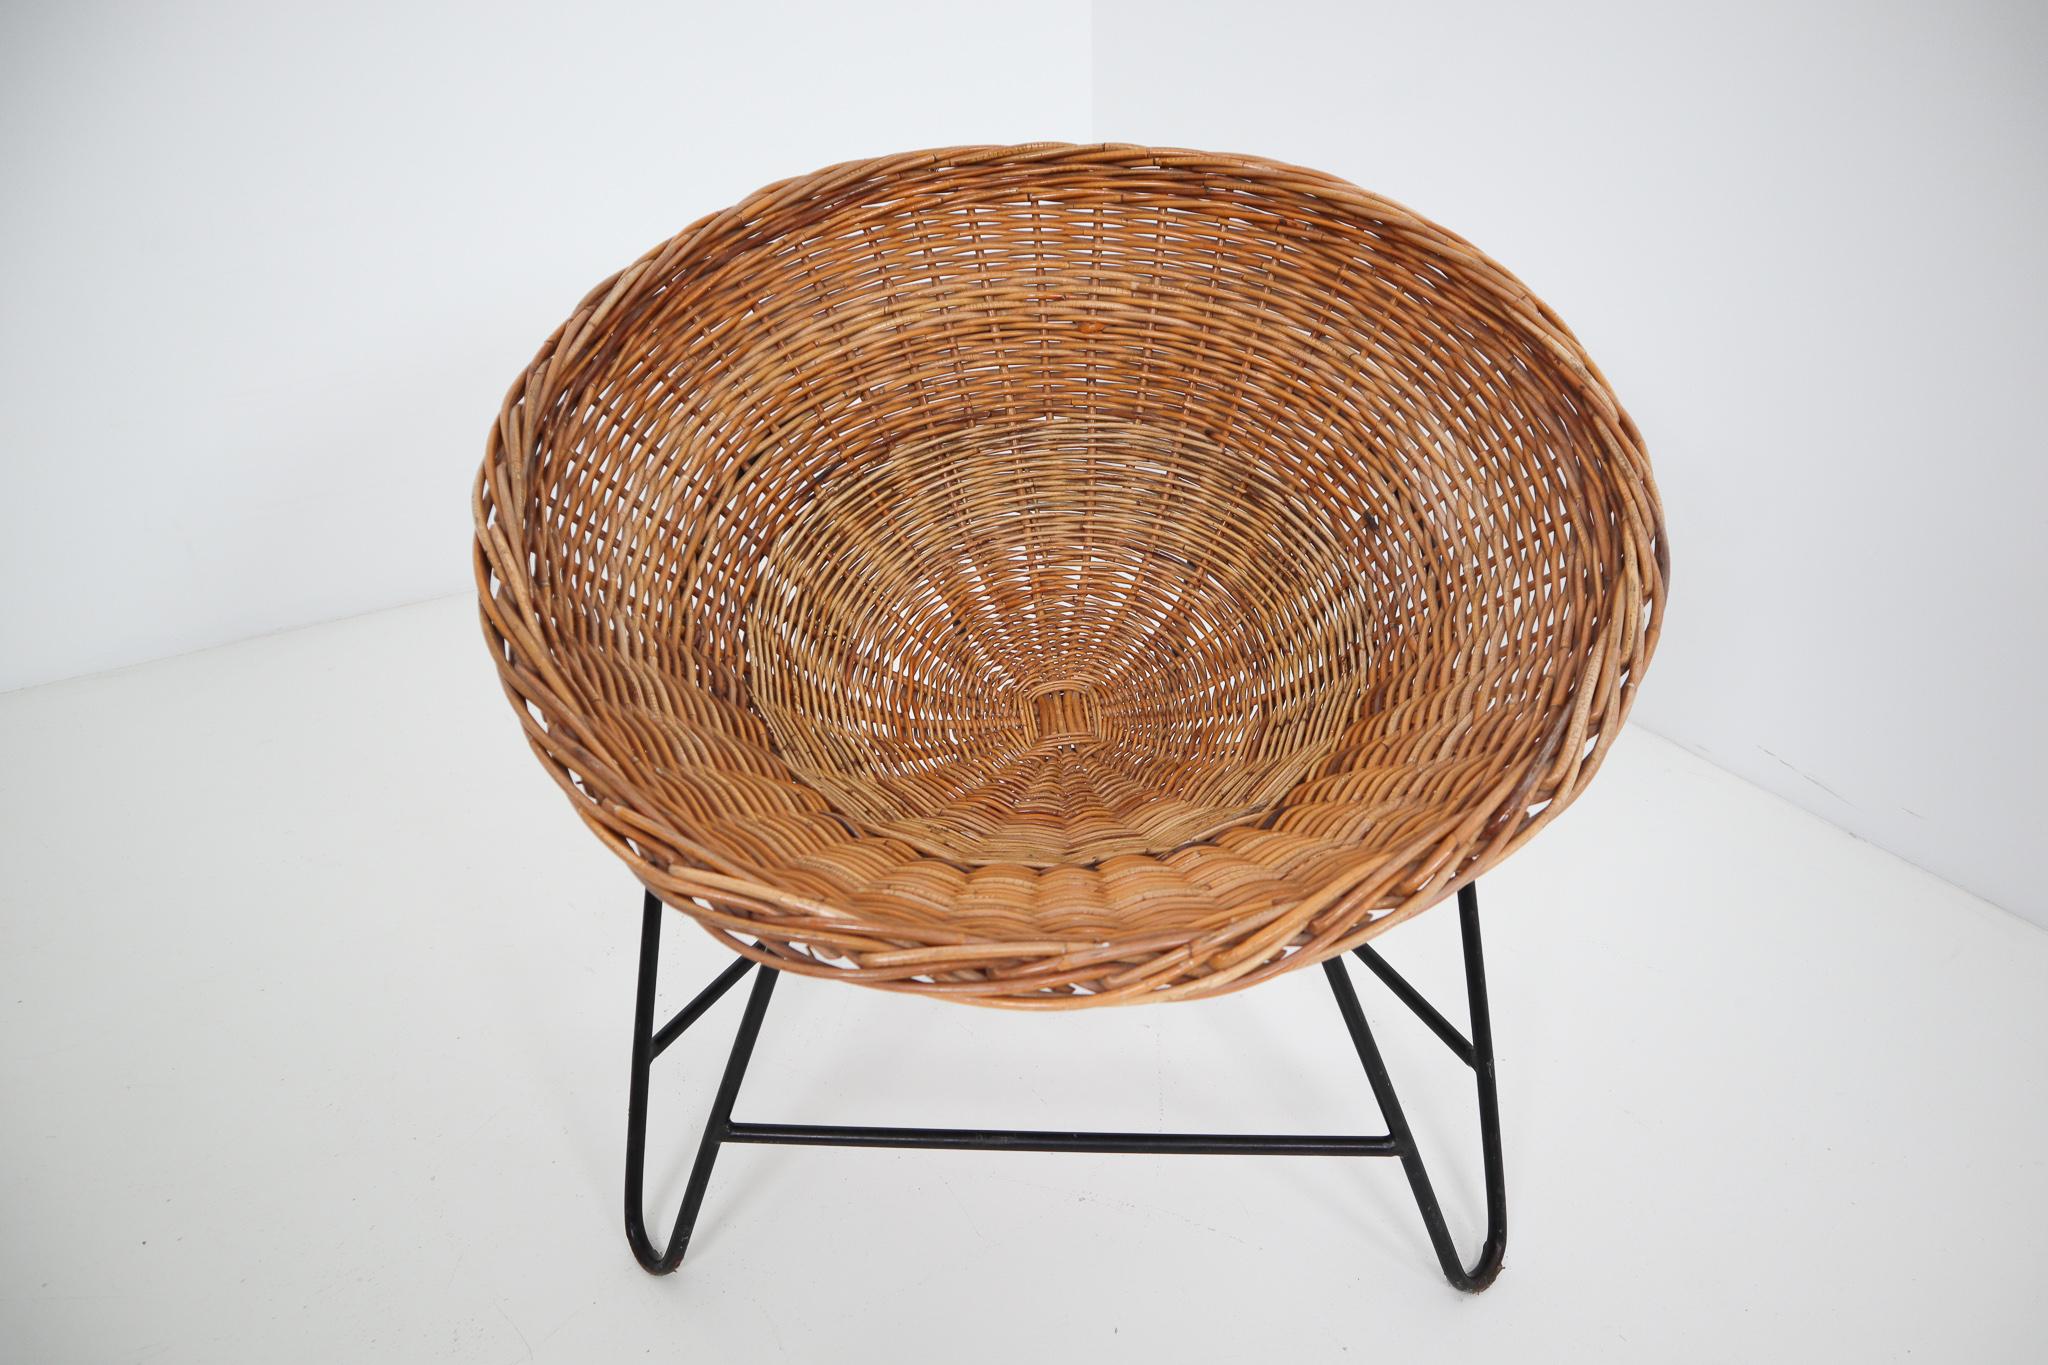 Wicker midcentury easy chairs designed and produced in Europe during the 1960s. The chairs are made from handwoven wicker for the seat that is formed into a basket. The frame is made of black lacquered steel. They are comfortable to sit in and